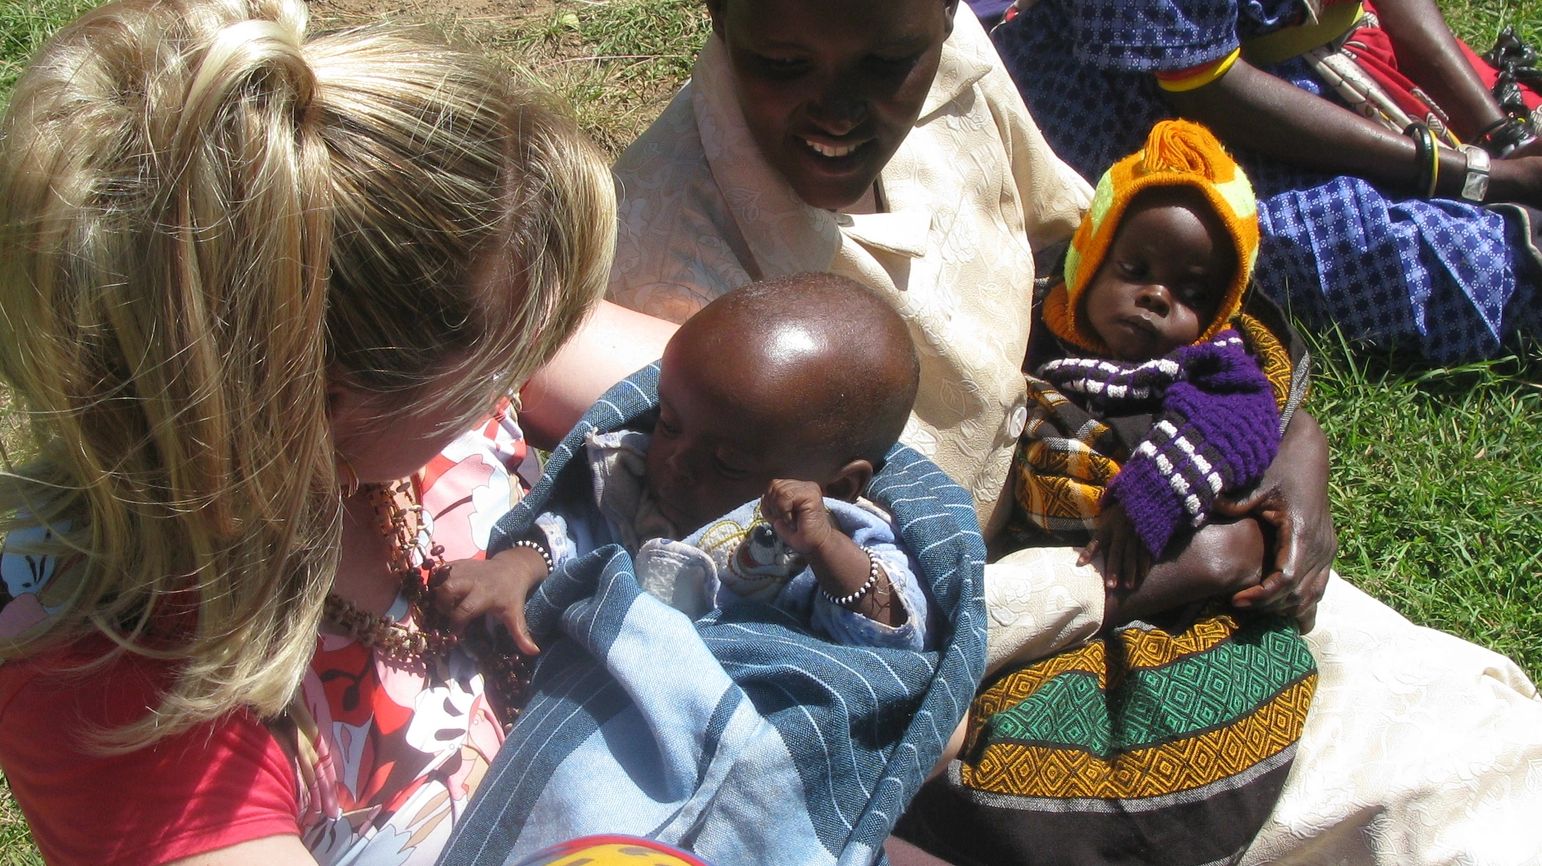 Deborah is Masai Mara clinic fascinated by new friends and a beautiful baby, part of Kensington Care